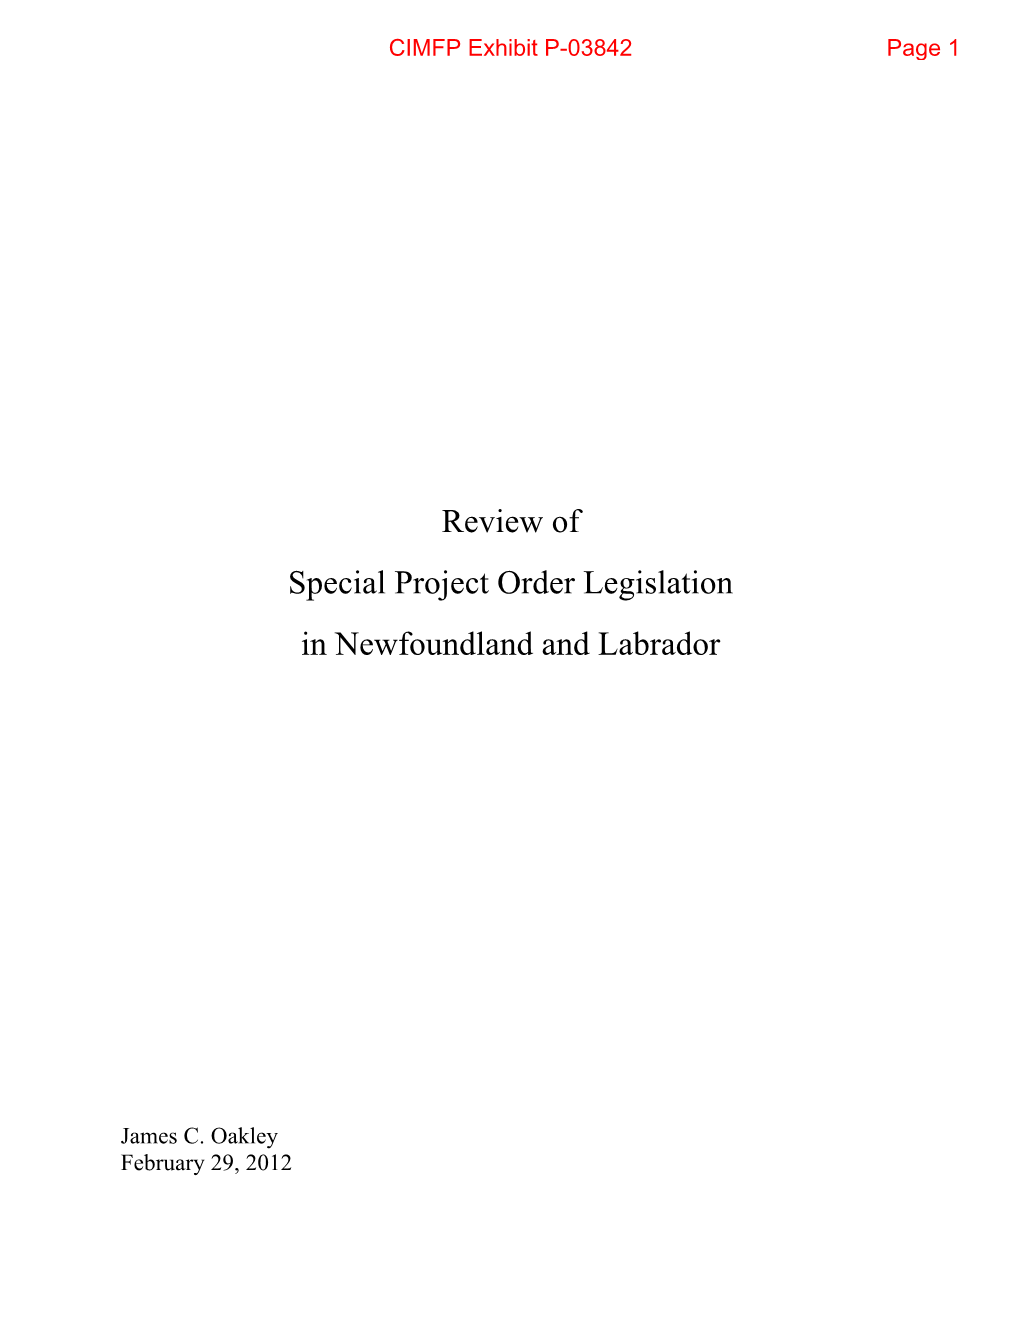 Review of Special Project Order Legislation in Newfoundland and Labrador